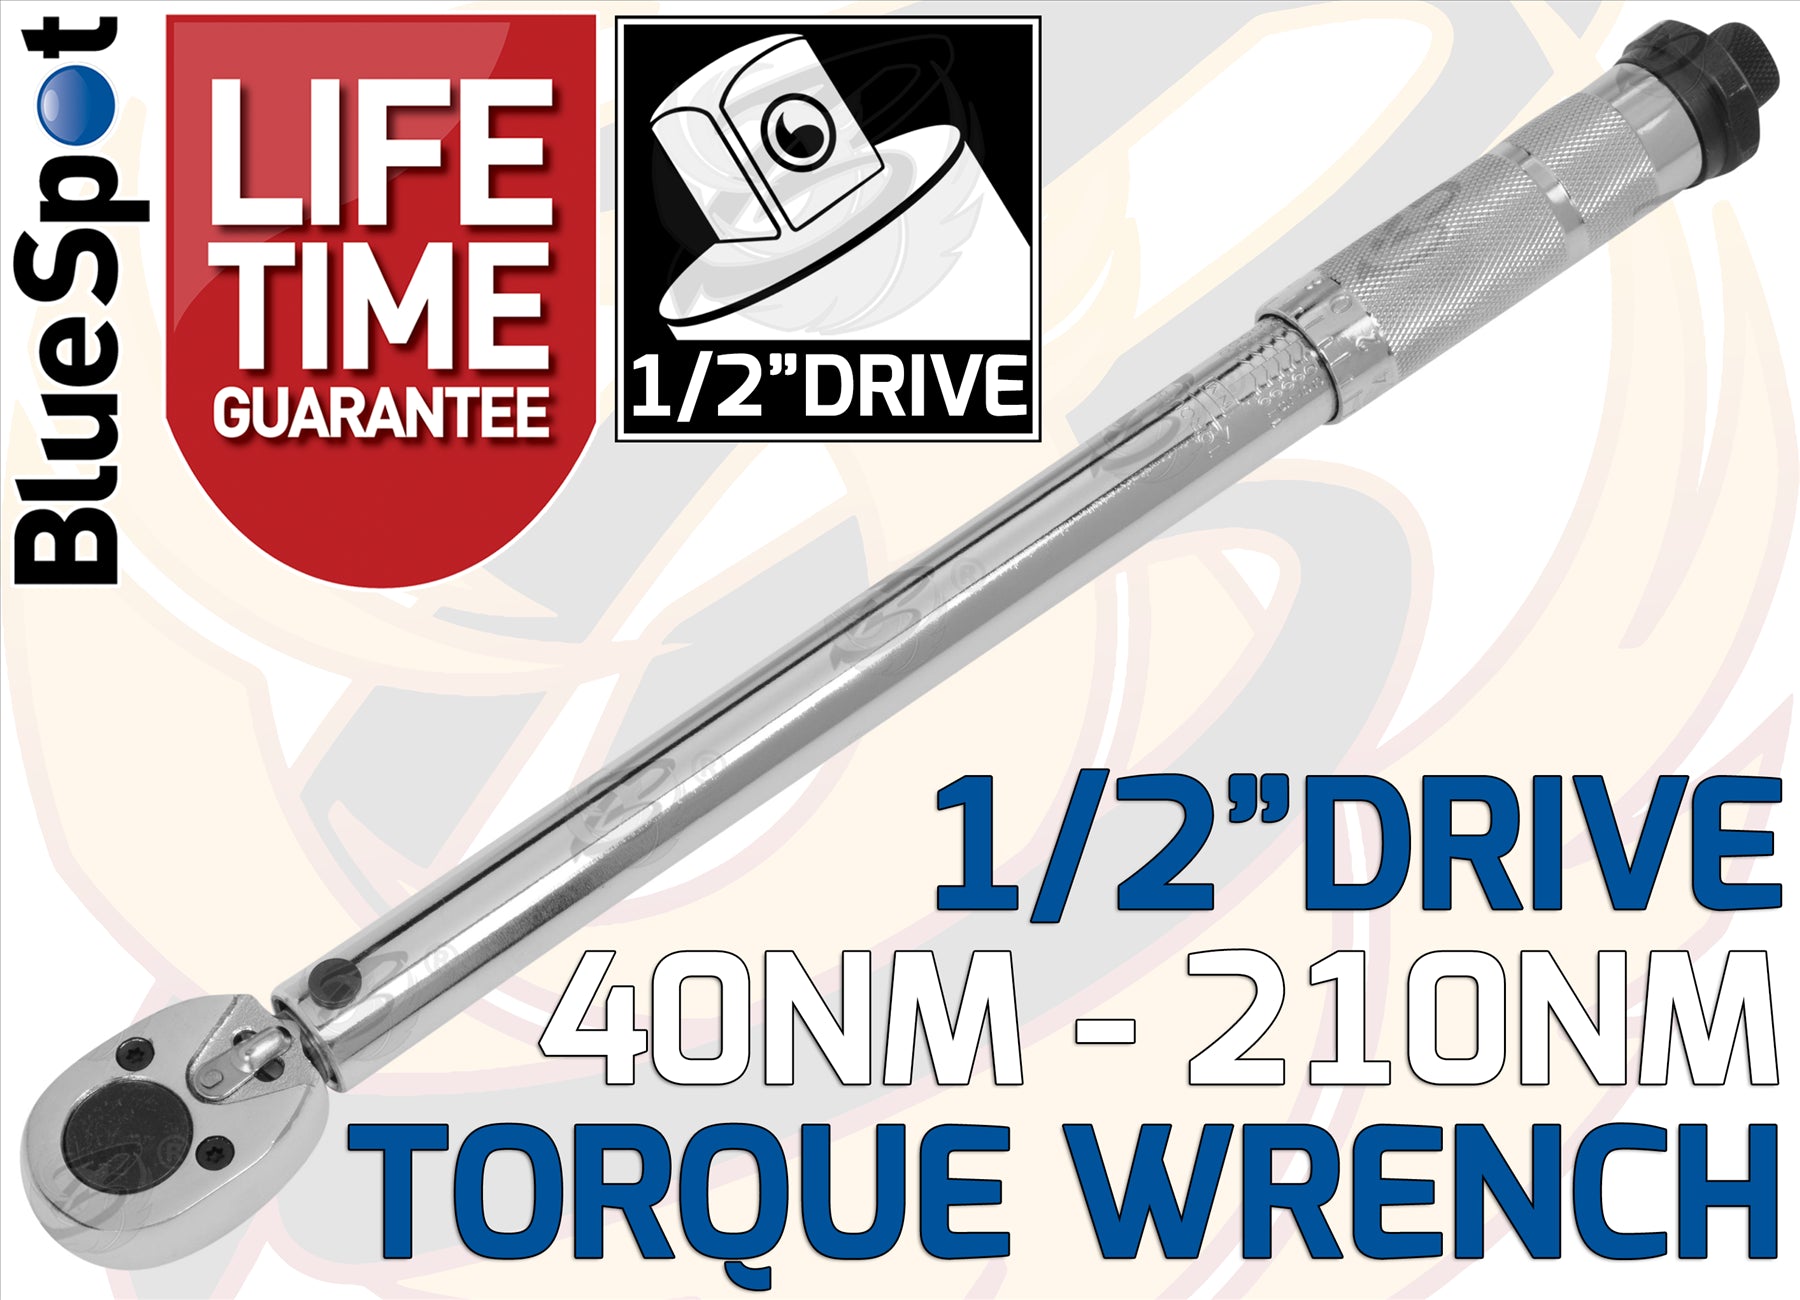 BLUESPOT 1/2" DRIVE CALIBRATED TORQUE WRENCH 42Nm - 210Nm & 3PCS 1/2" DRIVE 6 POINT ALLOY WHEEL NUT SOCKETS